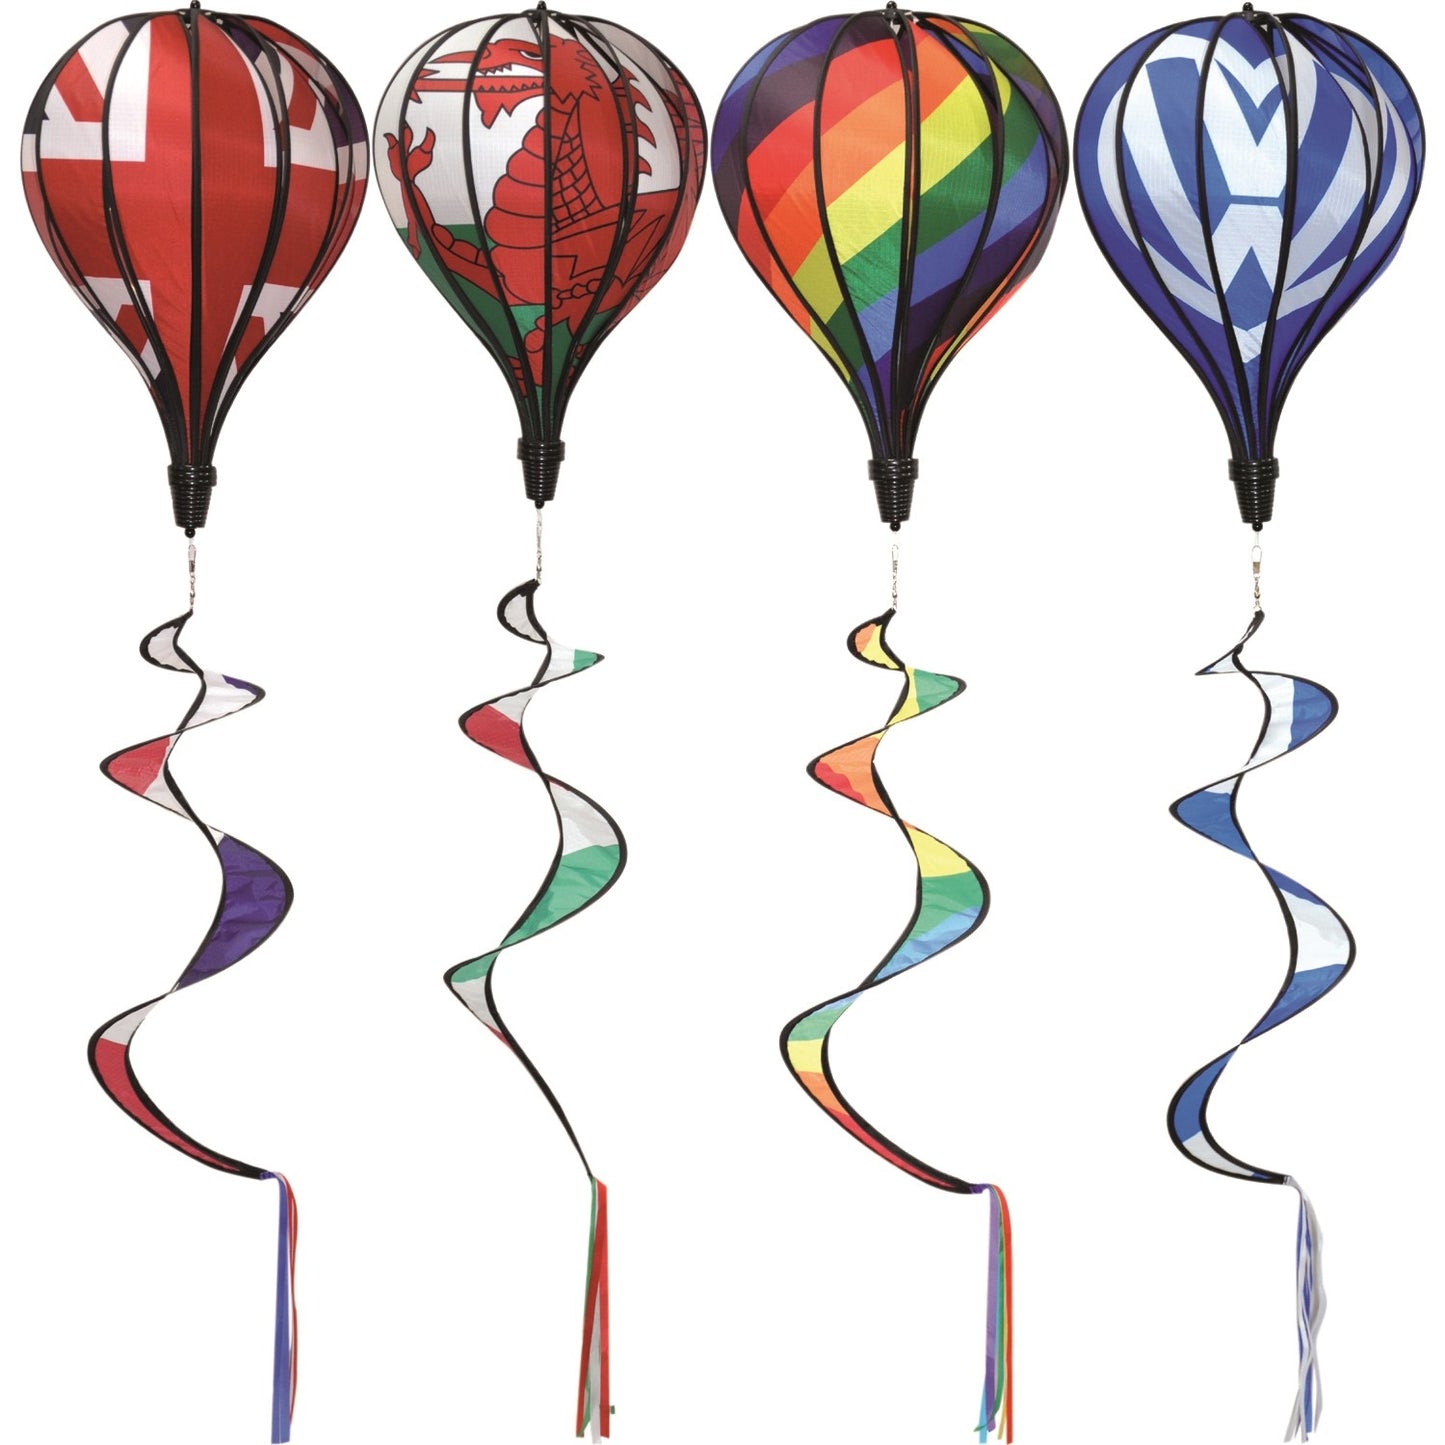 Grand Hot Air Balloon Spinners by Spirit of Air - Extra Large